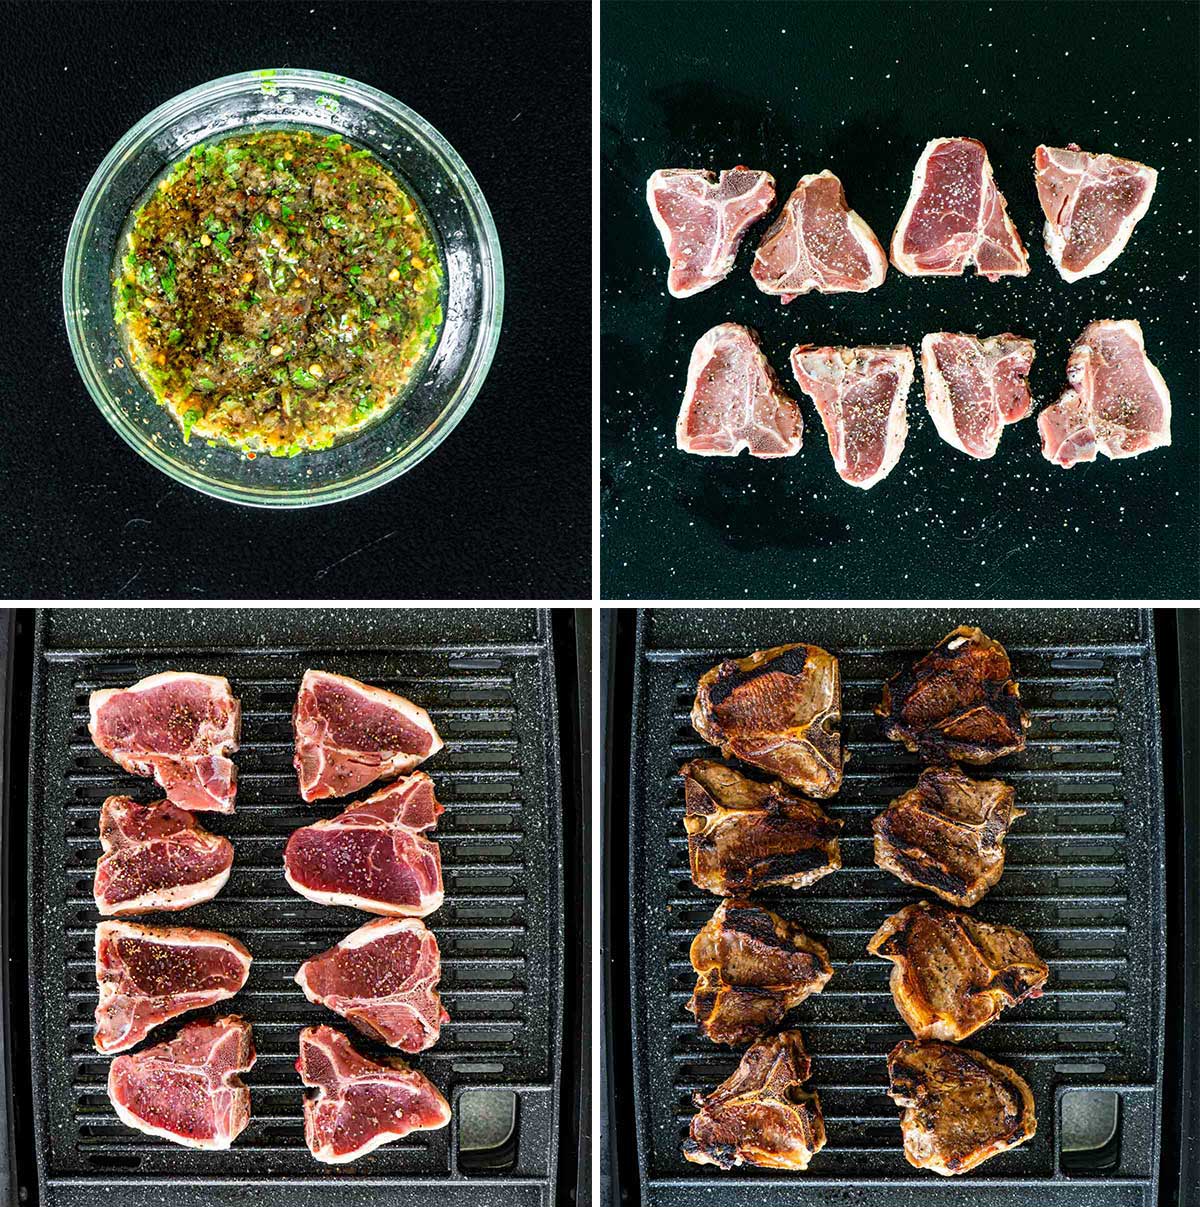 detailed process shots showing how to grill lamb chops and make garlic mint sauce